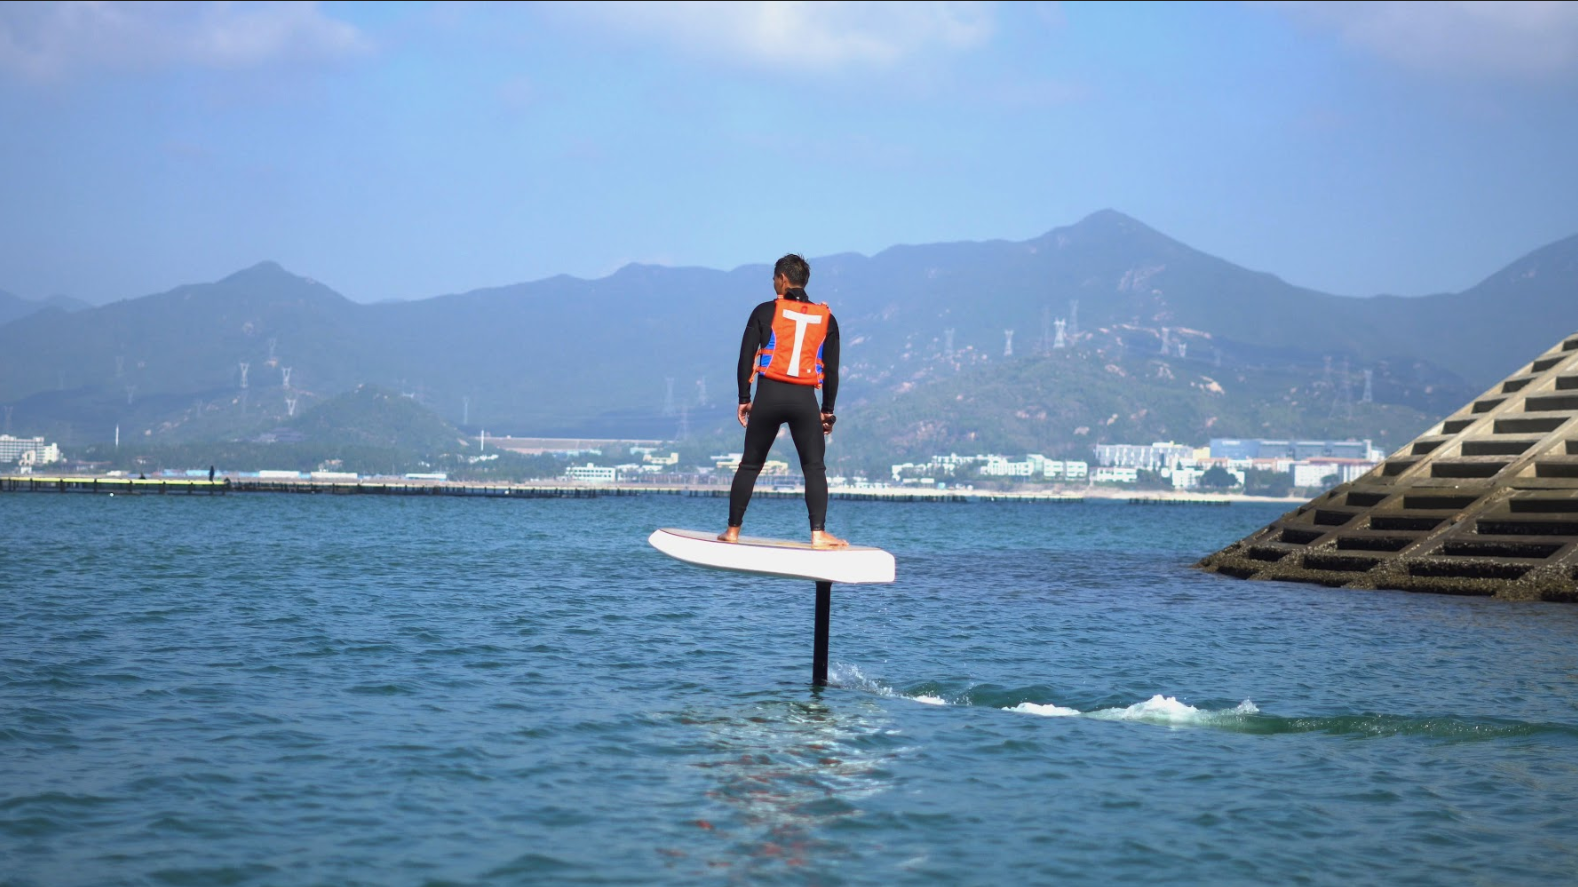 Are you finding the latest hydrofoil boards for sale with attractive deals?